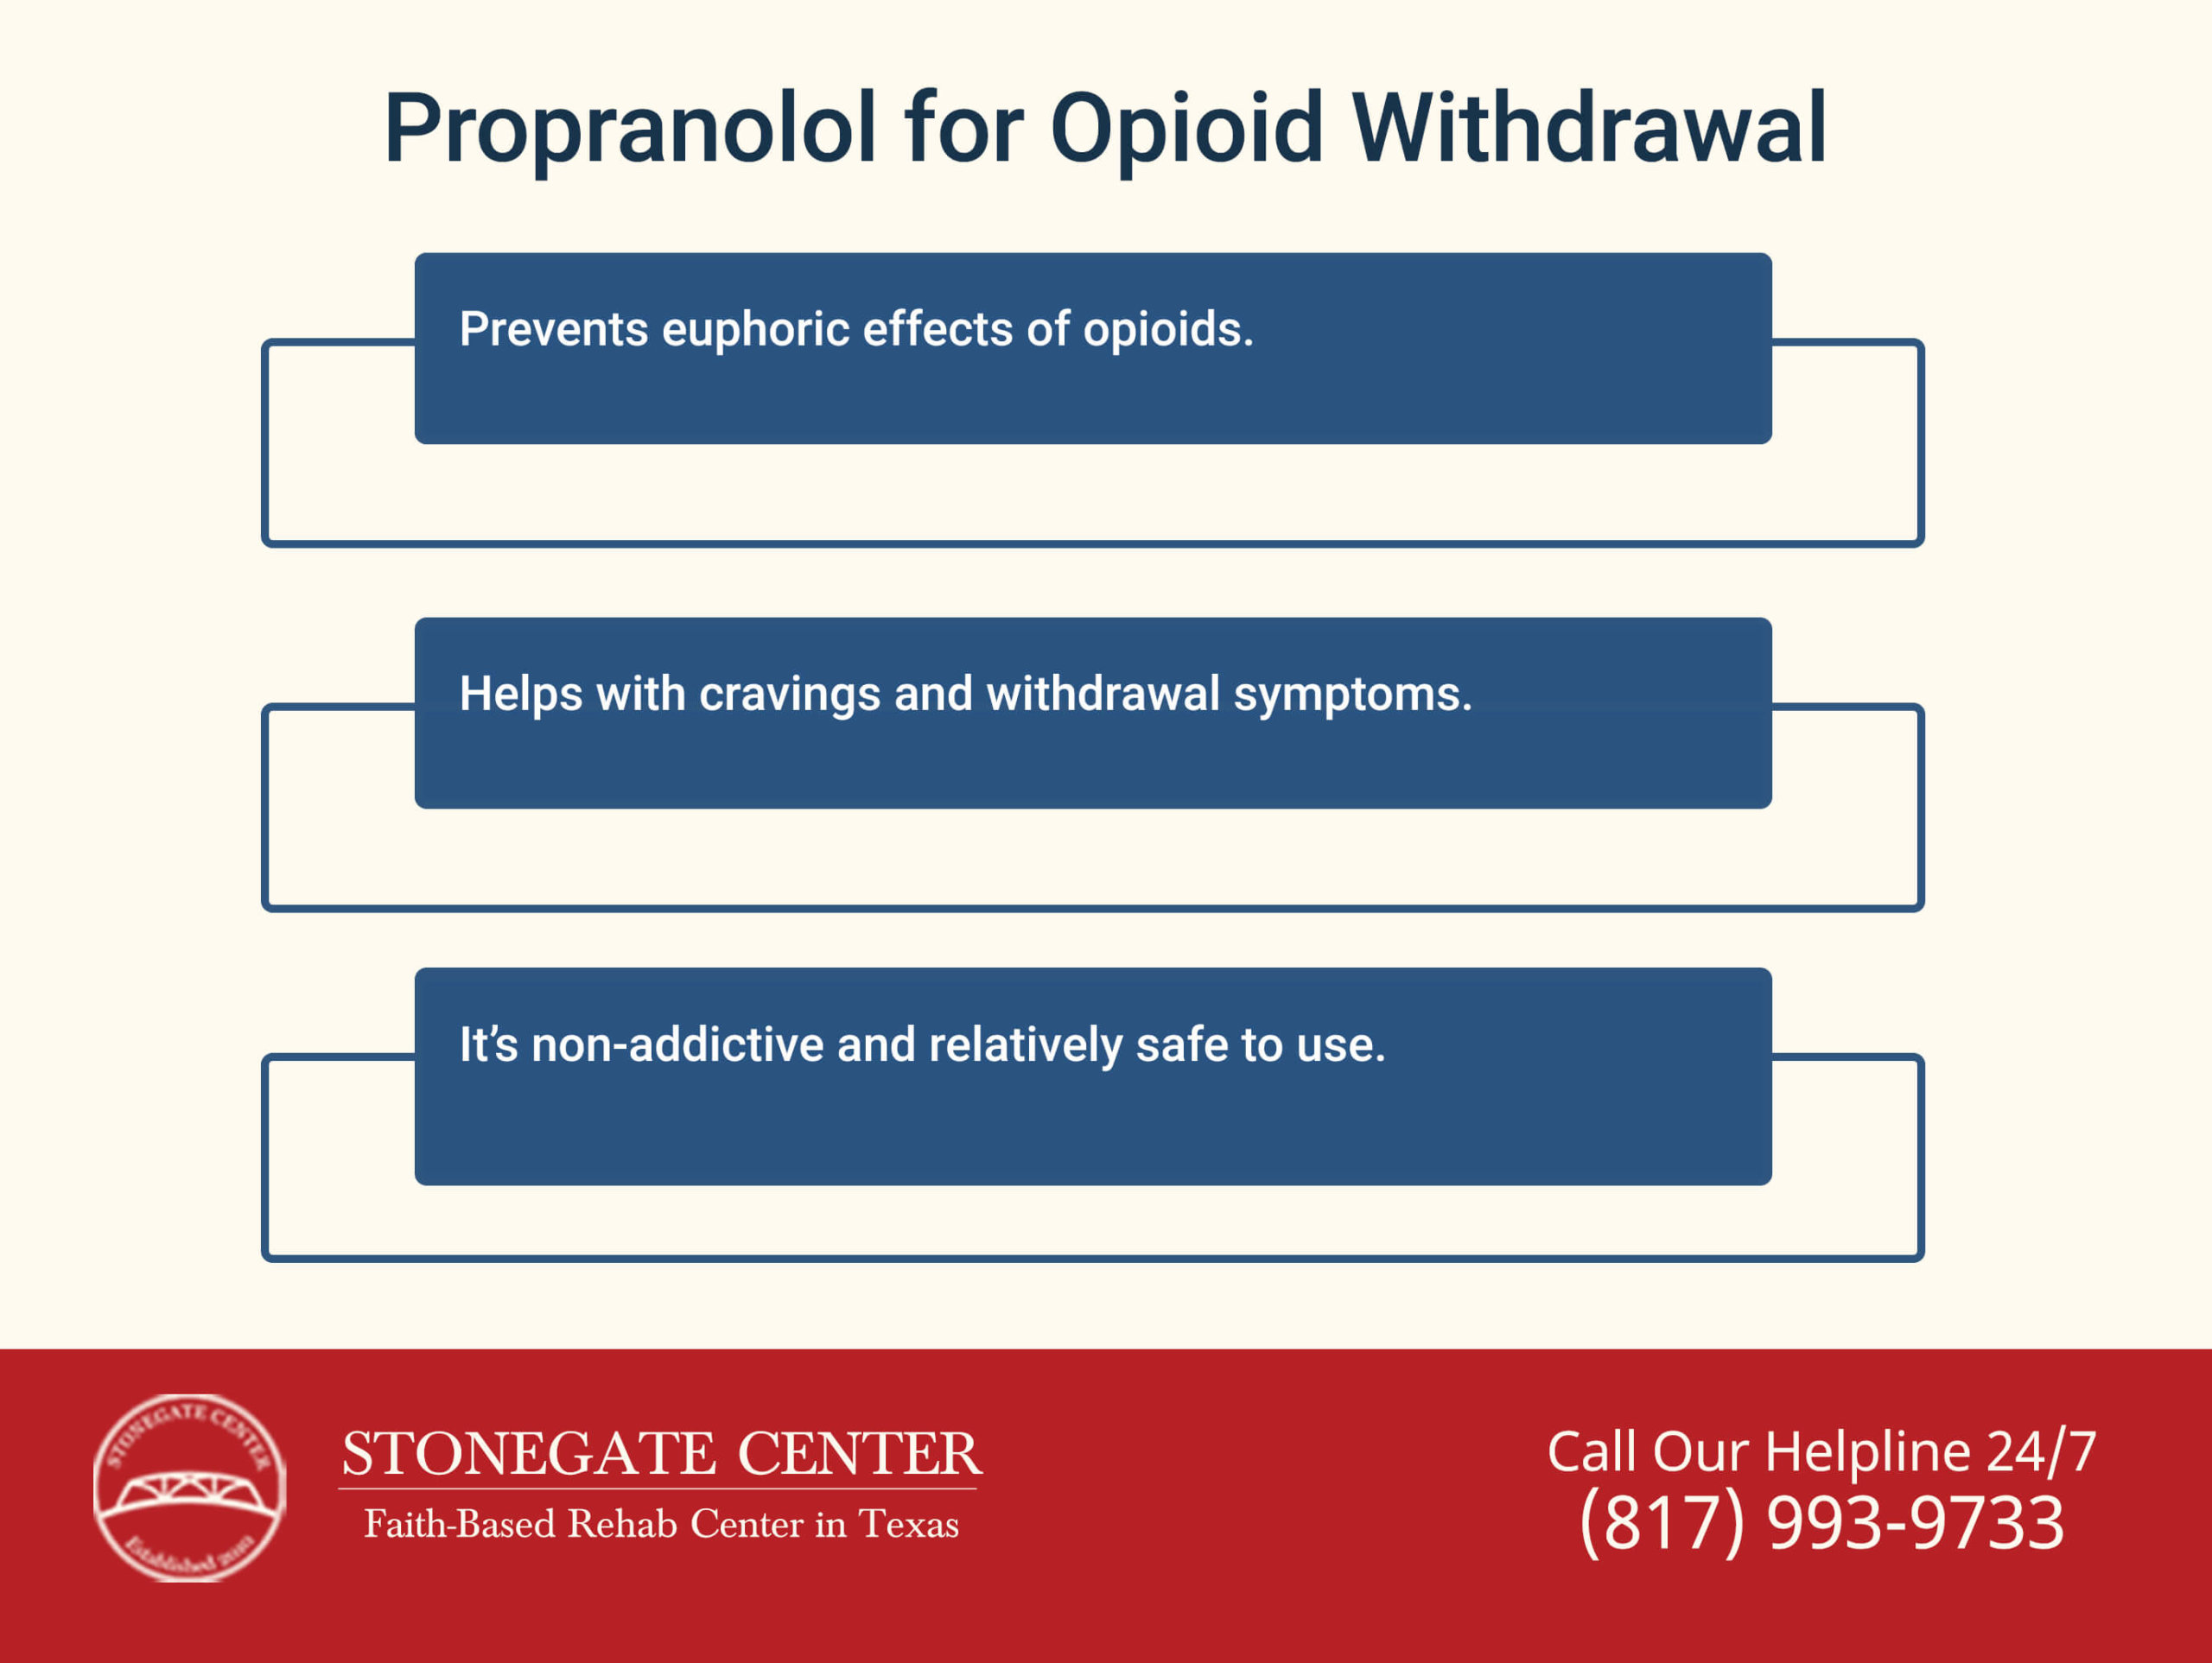 Stonegate Center Blog - Is Propranolol One of the Most Common Medications Given at Detox Centers? - Propranolol for Opioid Withdrawal